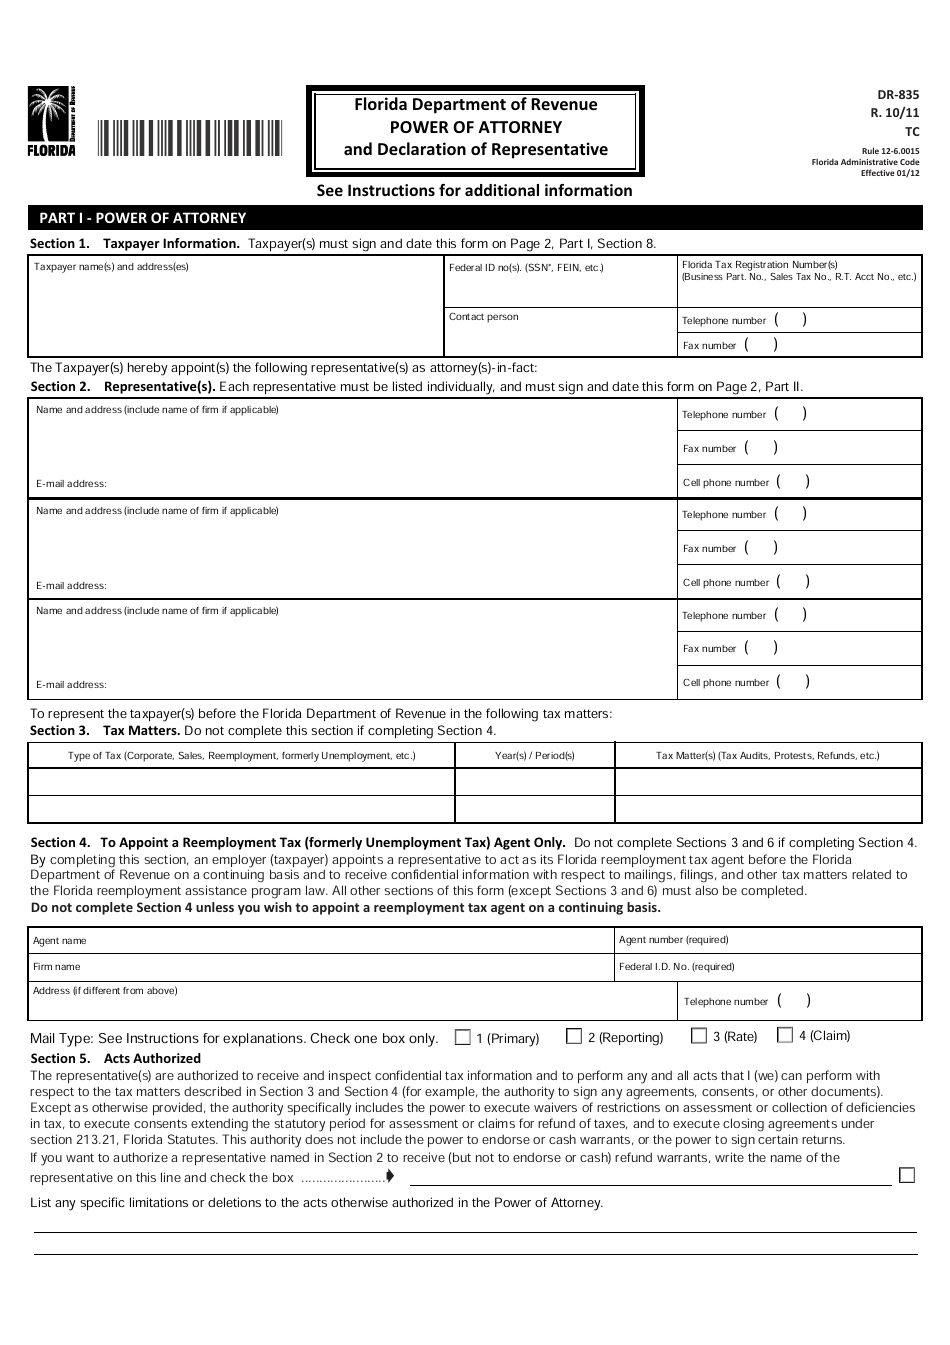 Form DR-835 Power of Attorney and Declaration of Representative - Florida, Page 1